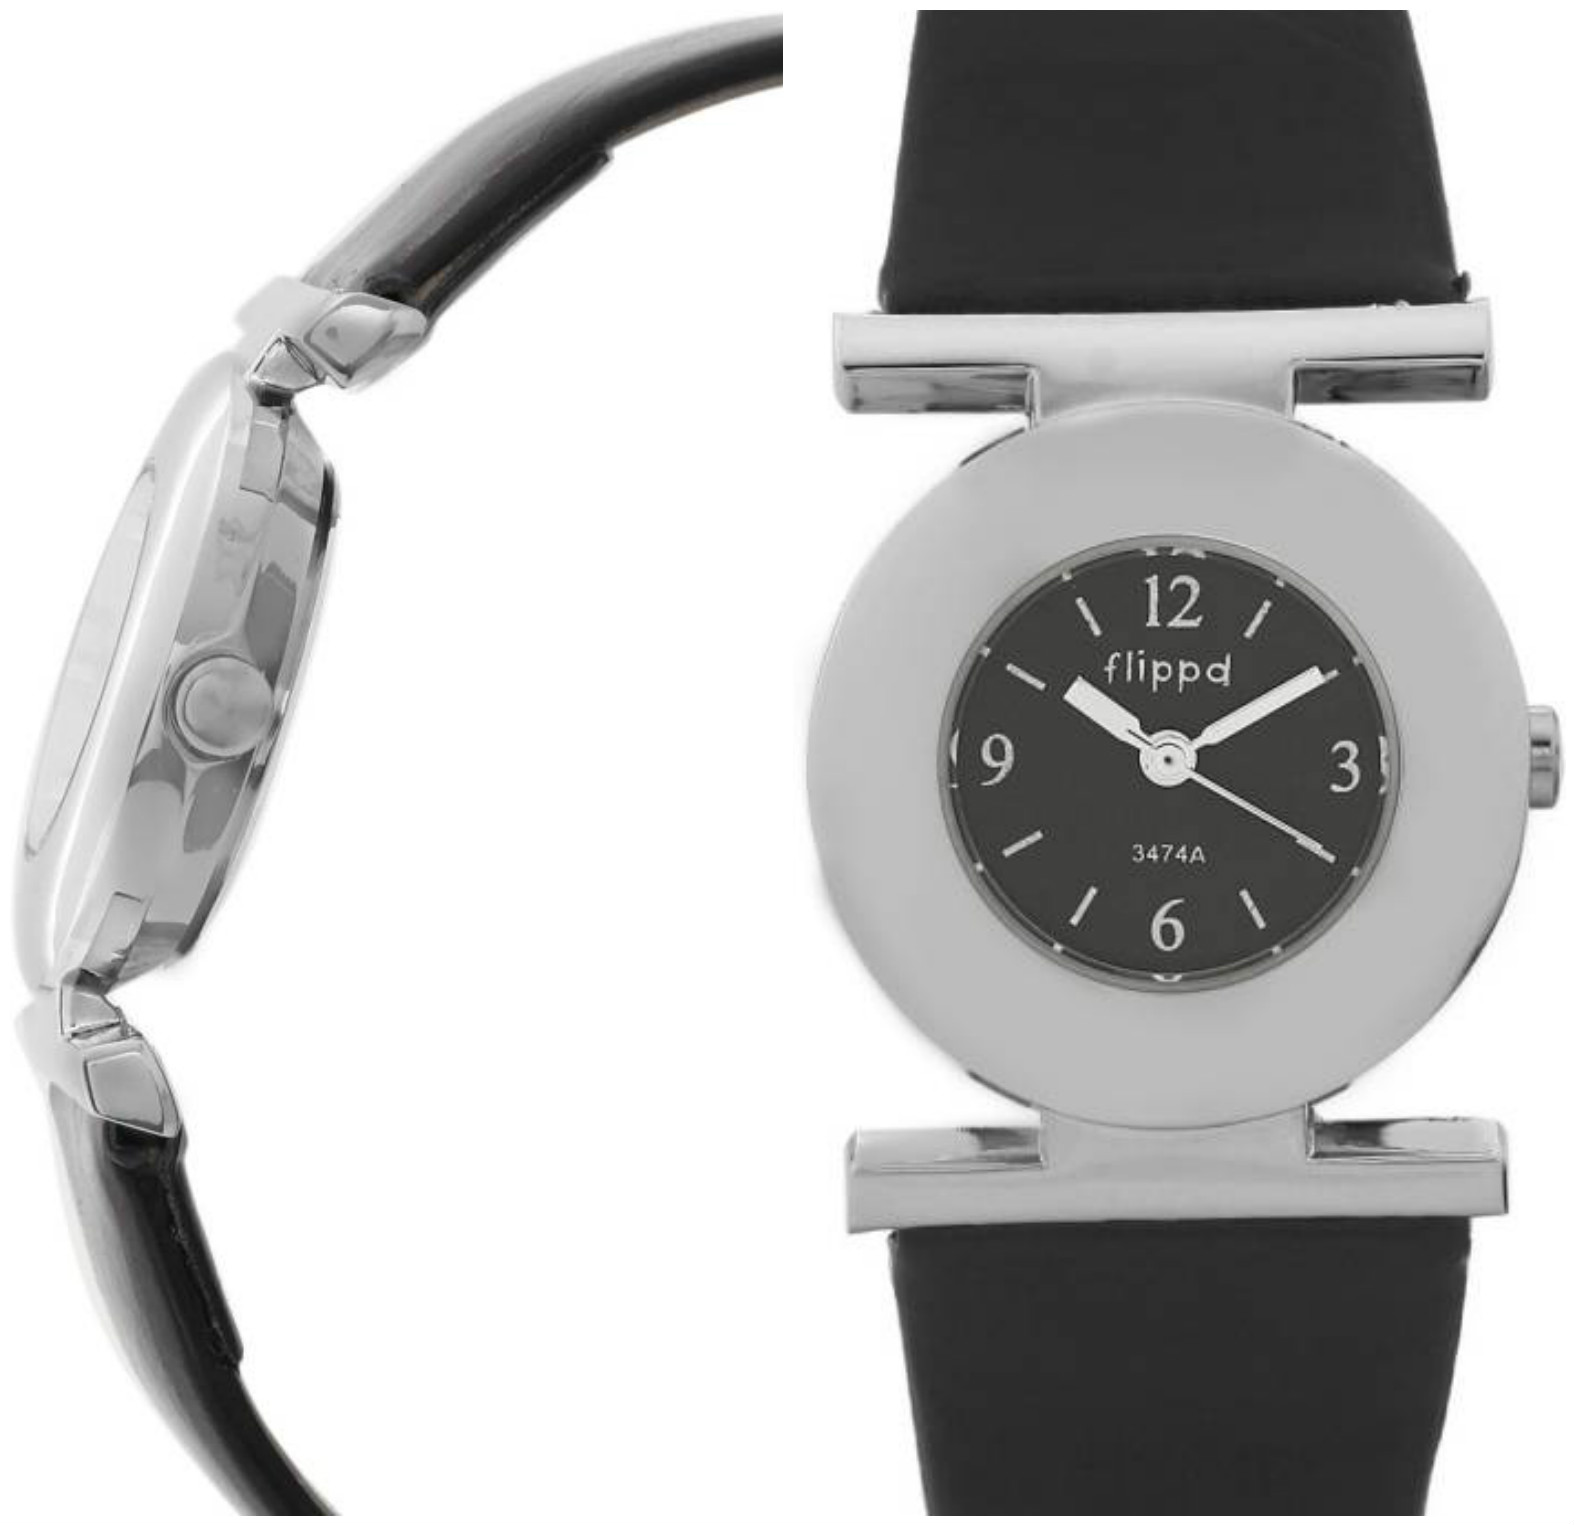 Attractive And Solid Wrist Watches For All the Women To Look Classy